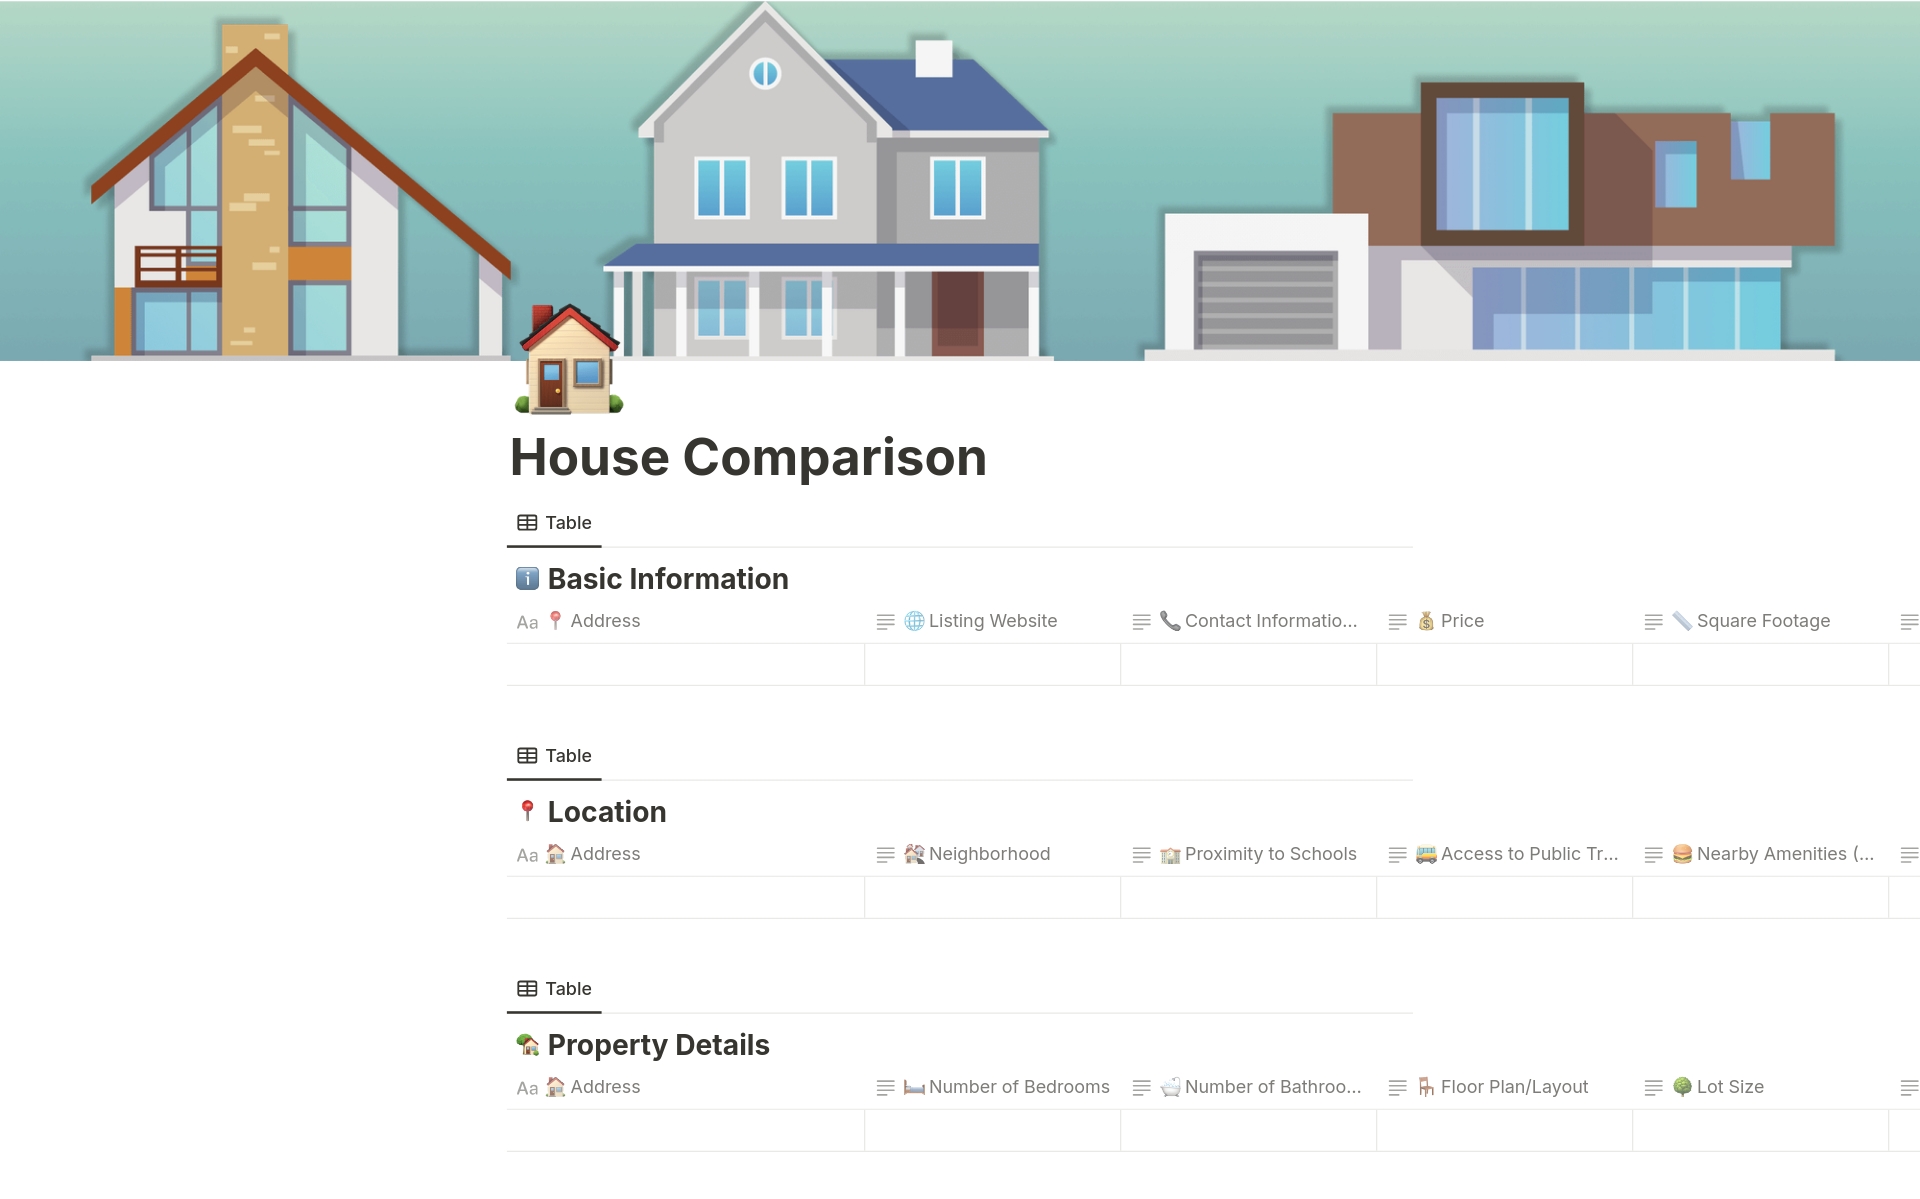 Efficiently compare houses with this comprehensive Notion template. Easily organize and evaluate property details, location, condition, financial information, and more to make informed decisions in your house-hunting journey.